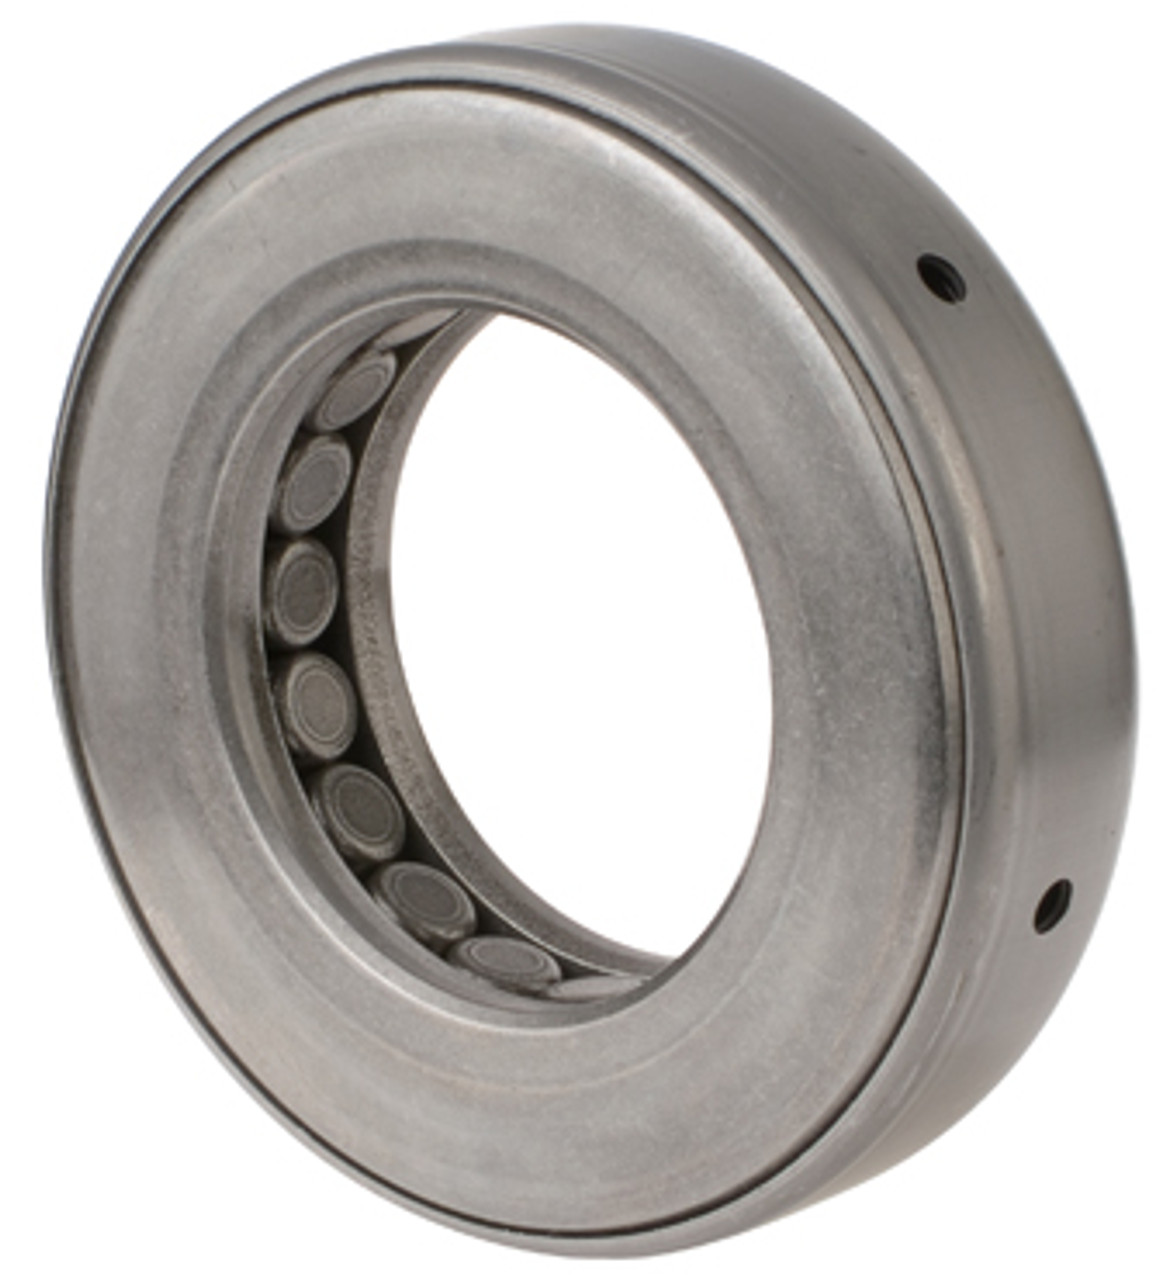 Timken® Stamped Race Thrust Bearing  T163W-904A4